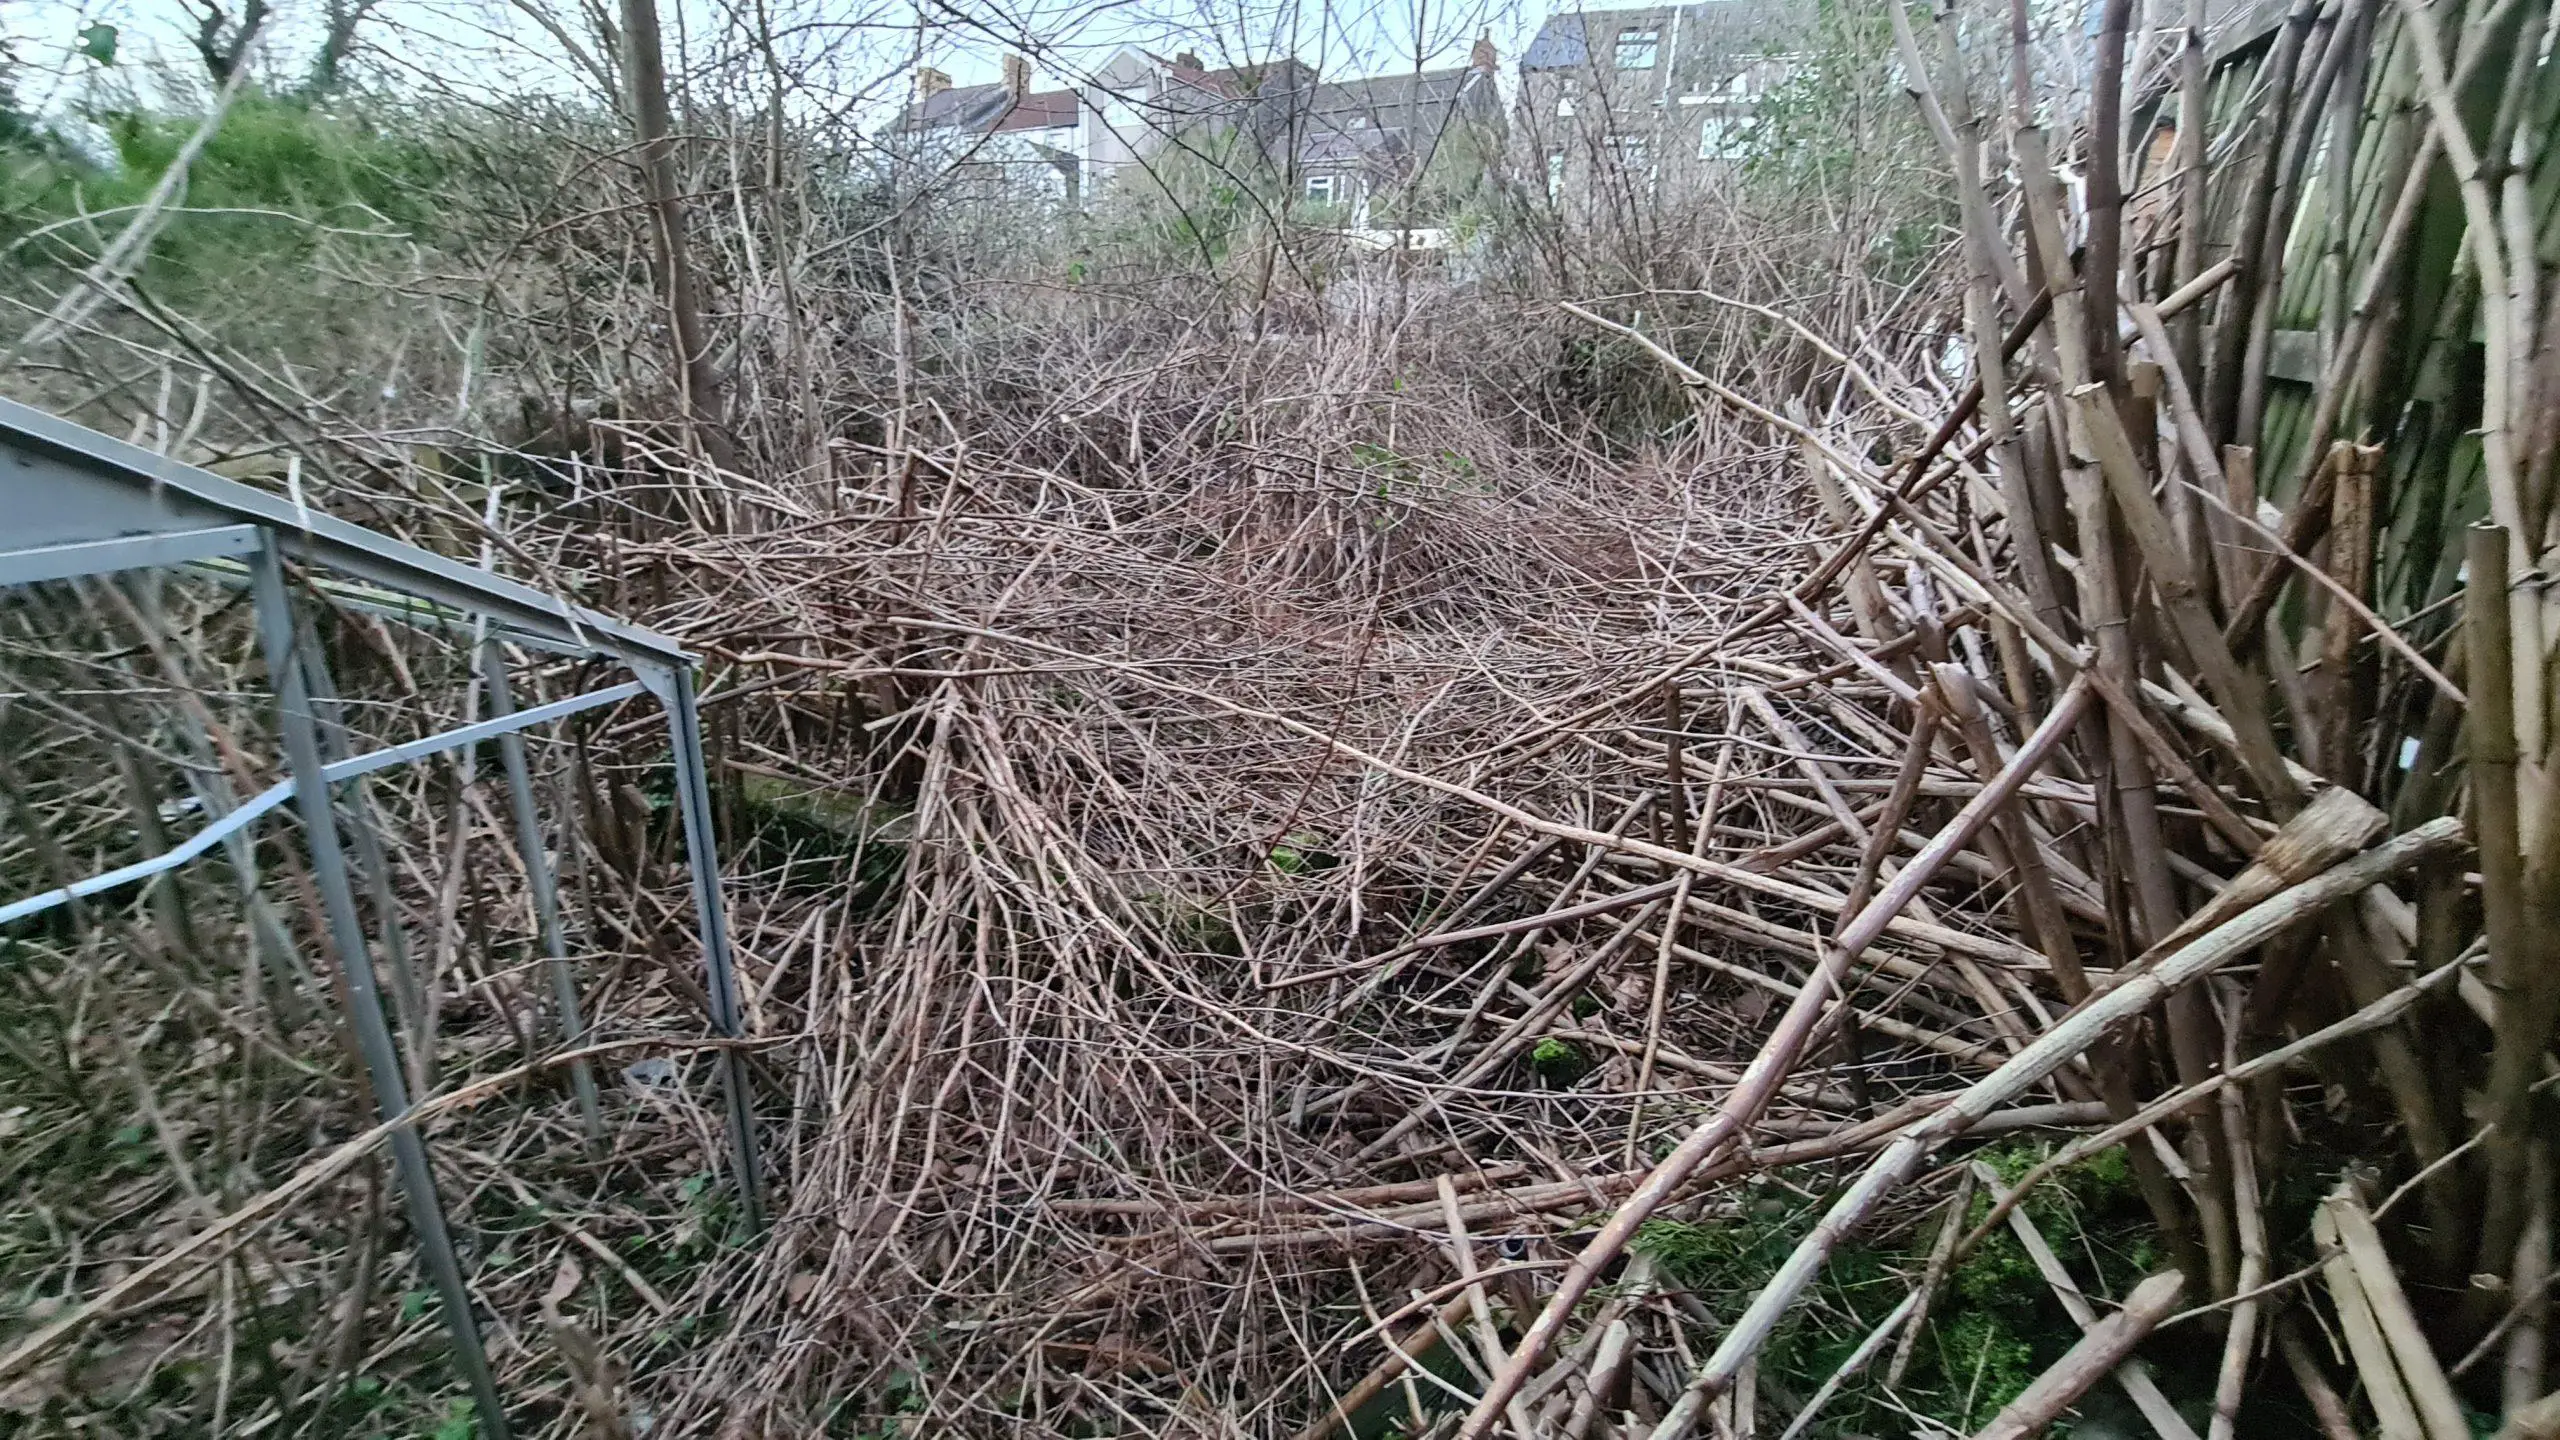 No small job to clear this invasion of Japanese knotweed which has consumed this garden for many years